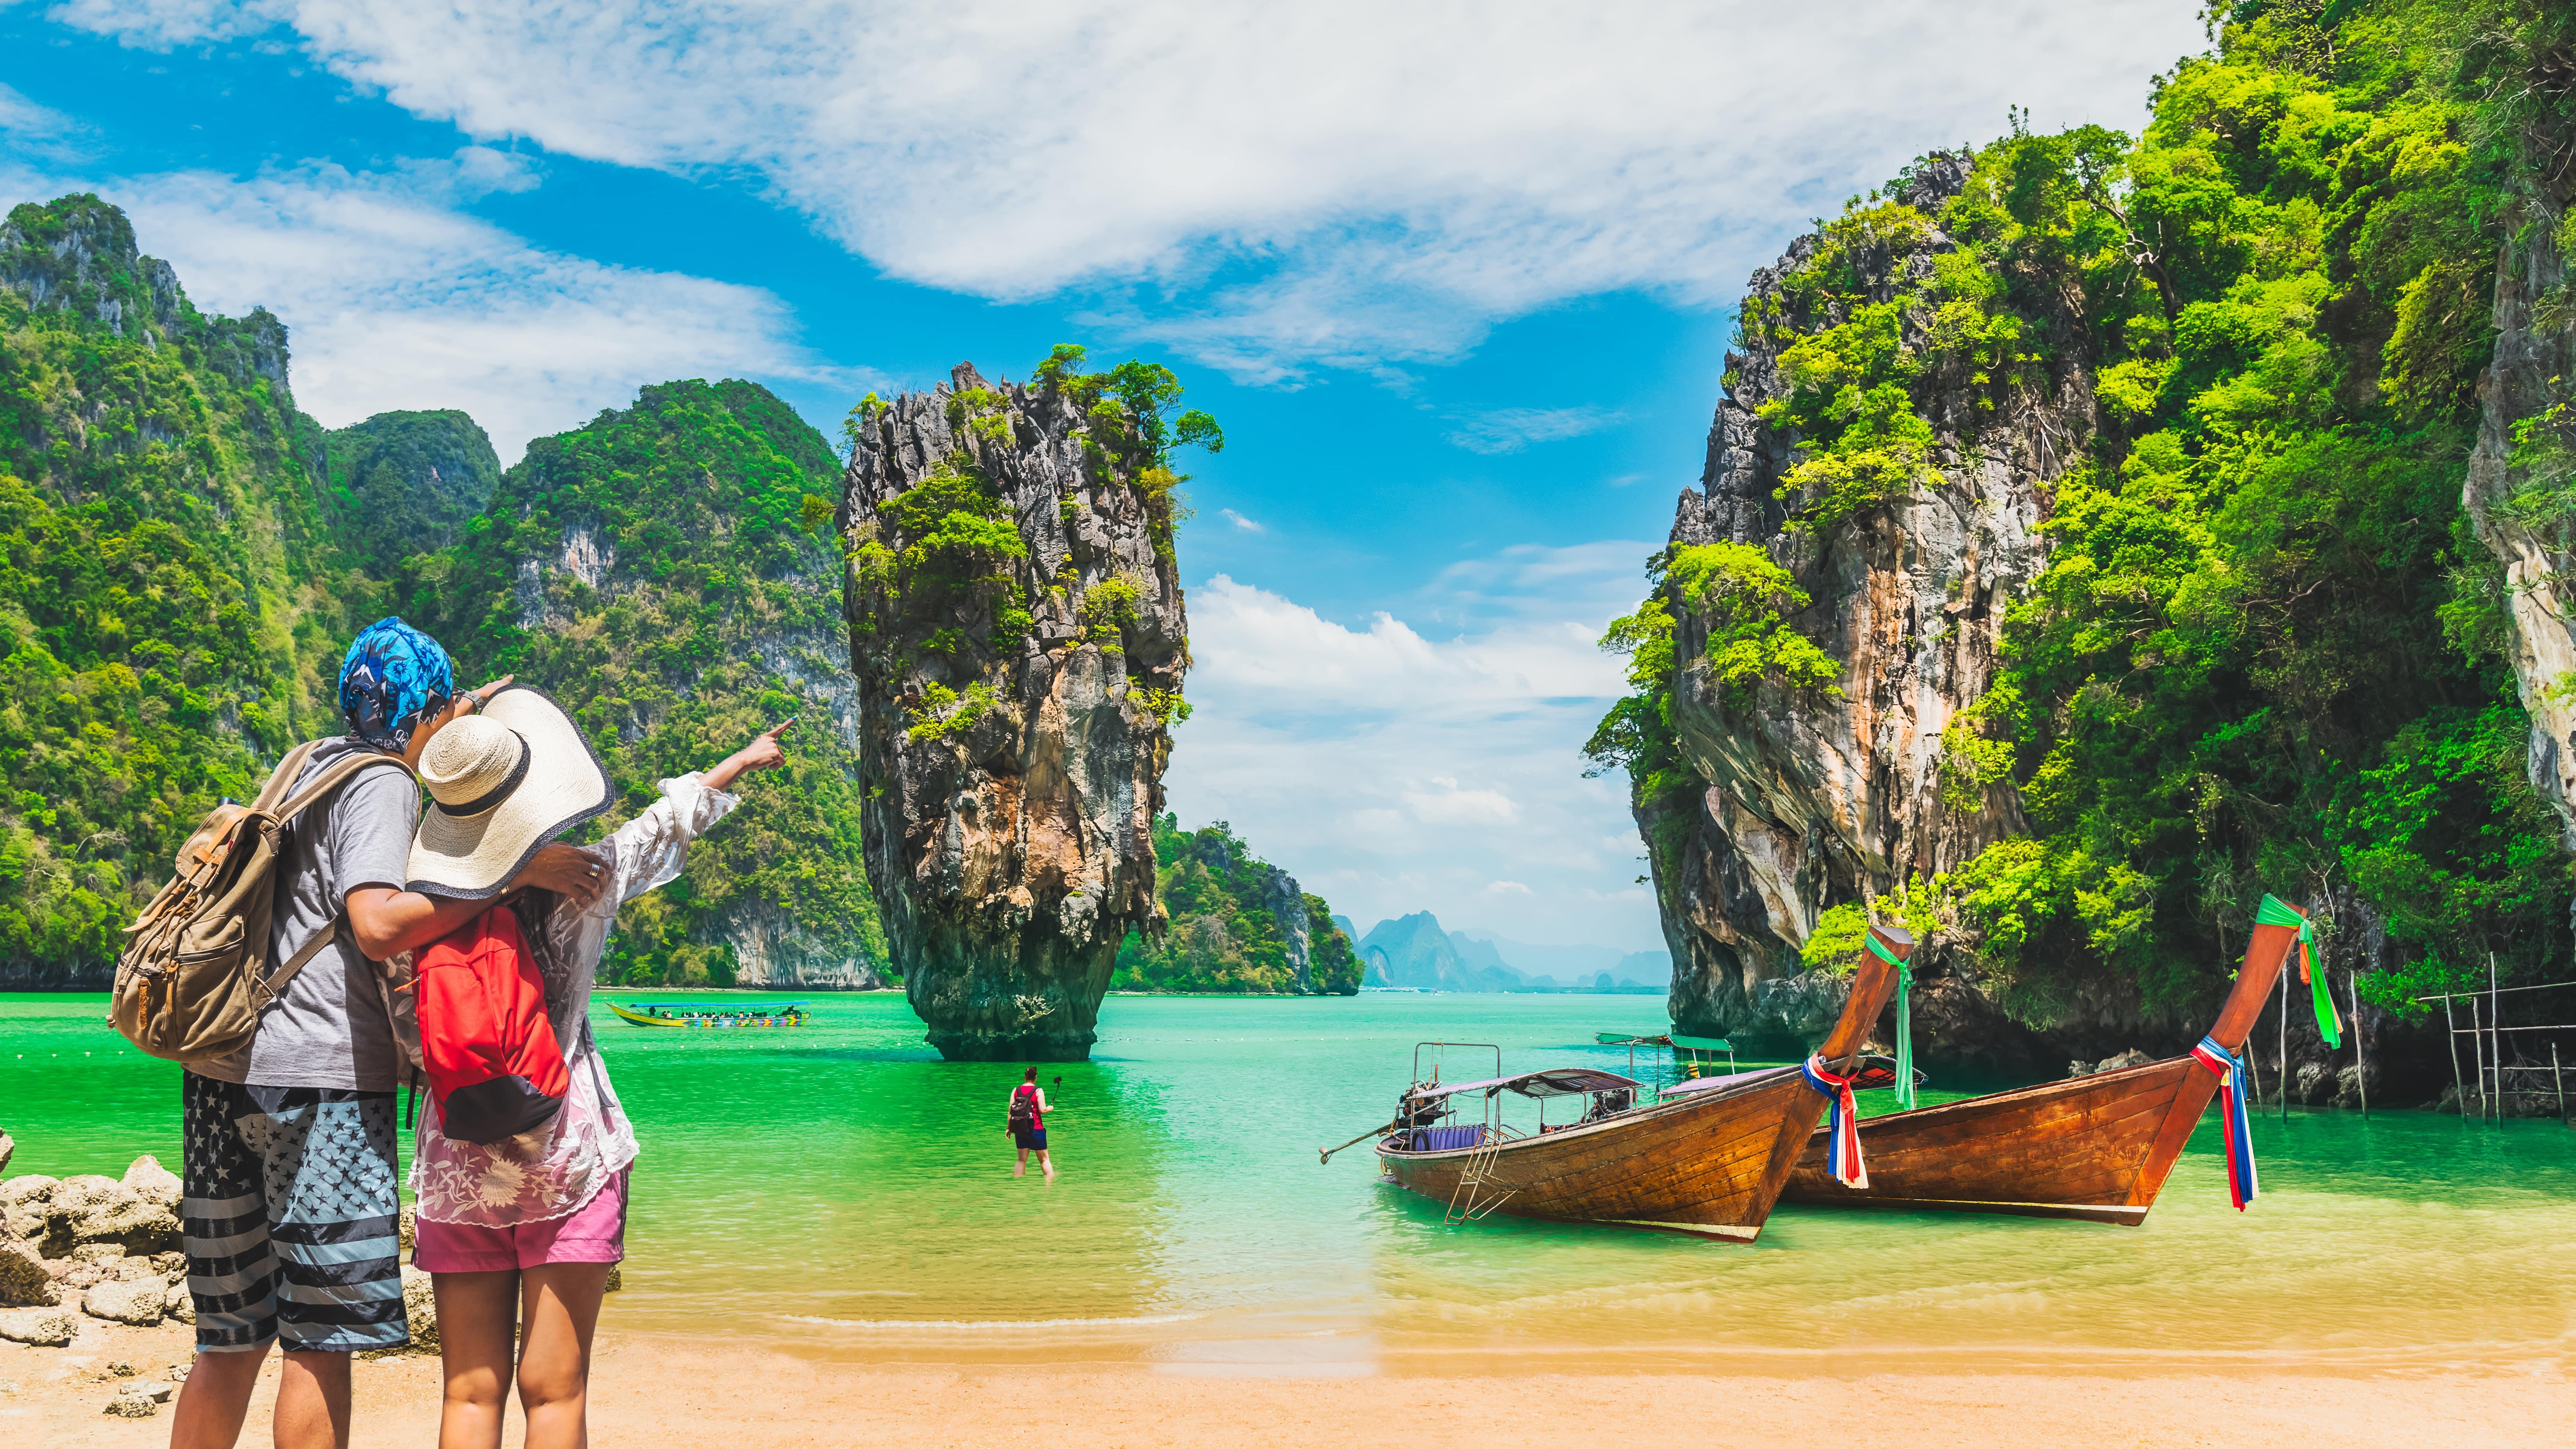 Phuket Packages from Kerala | Get Upto 50% Off